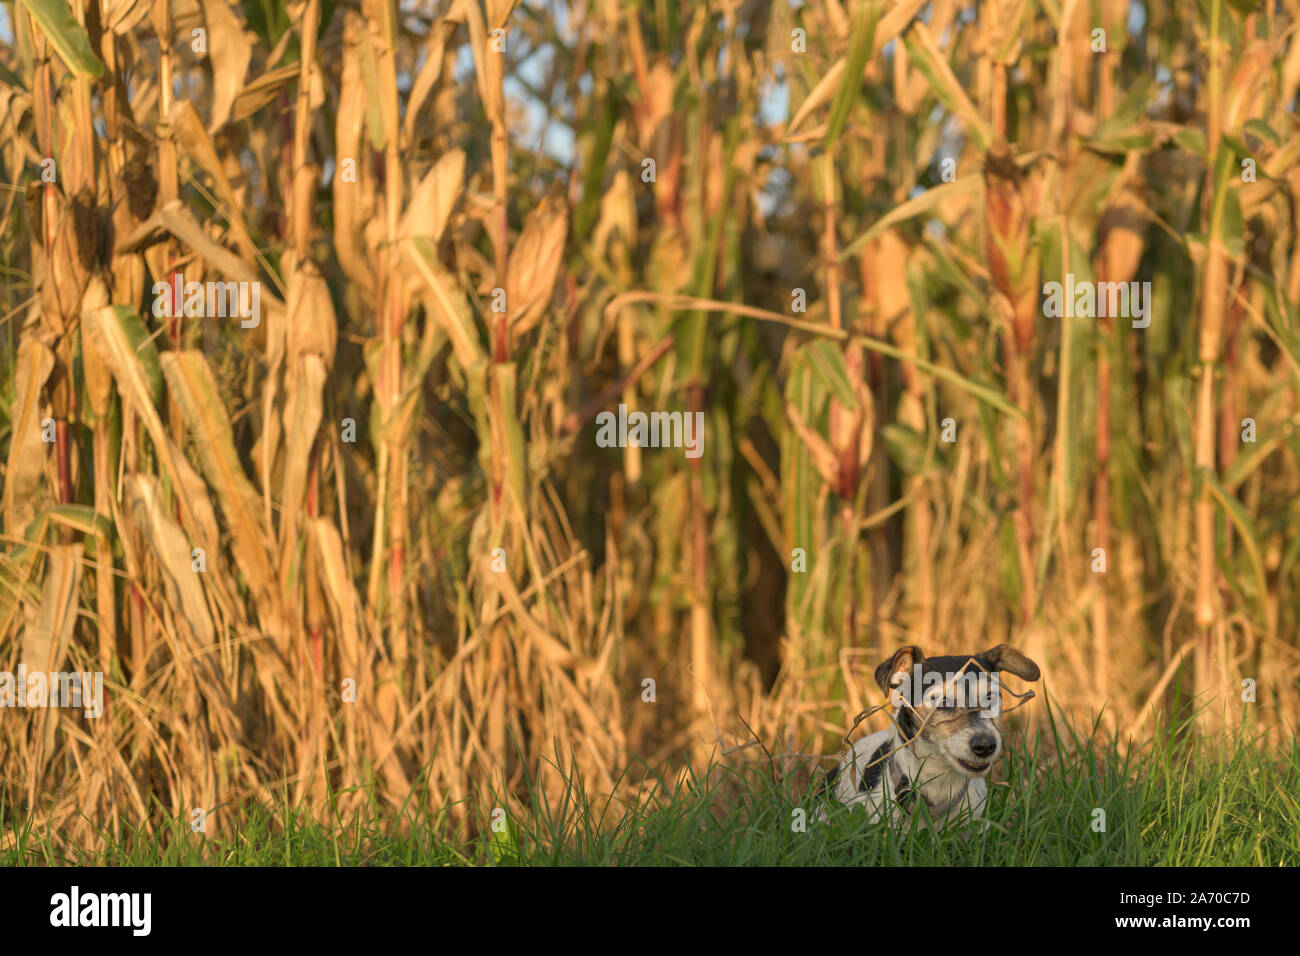 disobedient Jack Russell Terrier Dog has escaped and is sitting in front of a maize field. Stock Photo